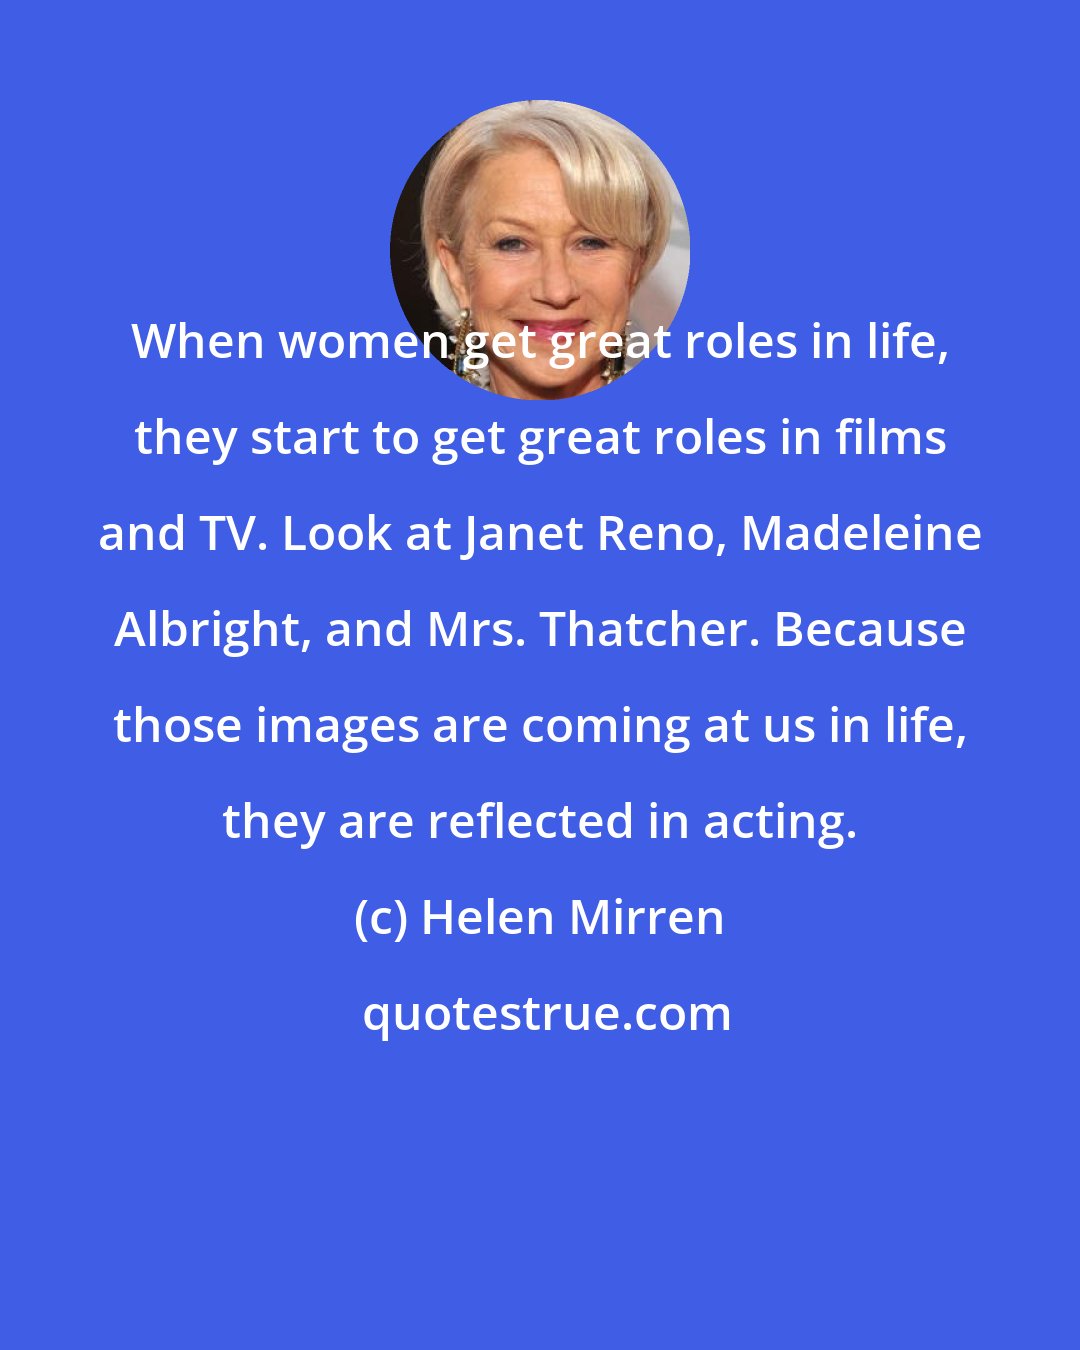 Helen Mirren: When women get great roles in life, they start to get great roles in films and TV. Look at Janet Reno, Madeleine Albright, and Mrs. Thatcher. Because those images are coming at us in life, they are reflected in acting.